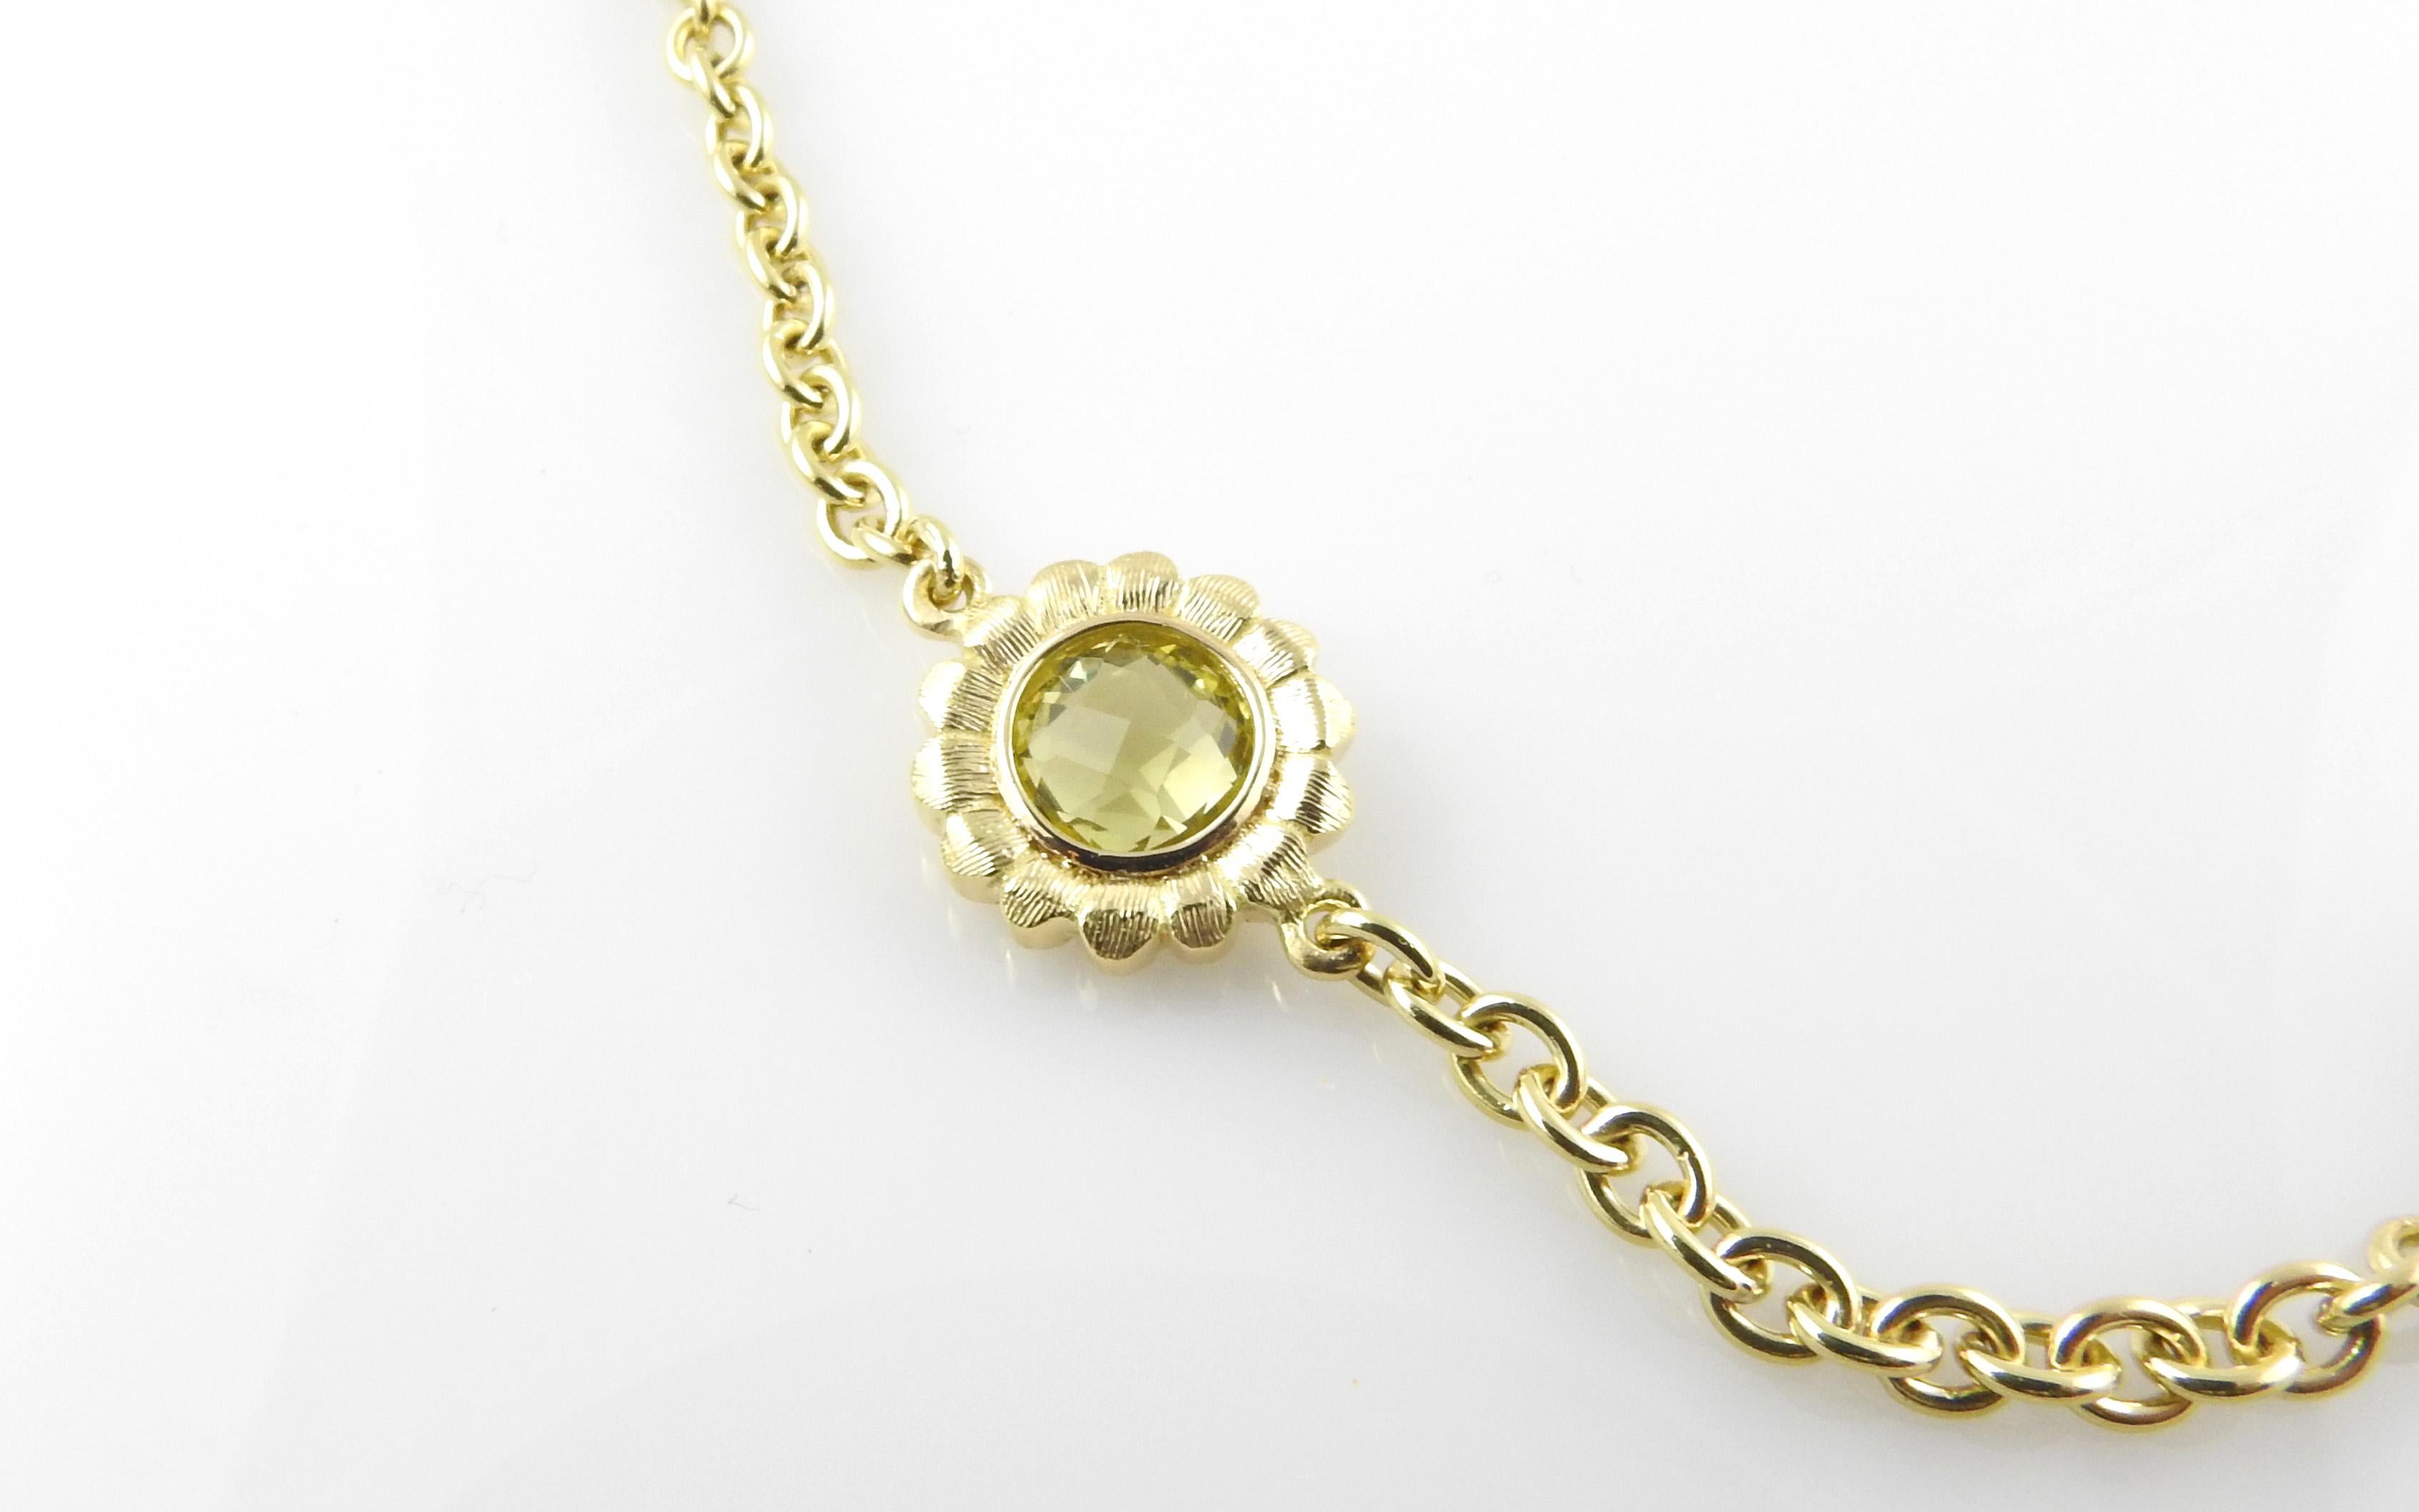 Bielka 18K Yellow Gold Citrine Sunflower Necklace

This gorgeous heavy chain link choker/necklace is set with 6 sunflower stations.

Each station is set with a faceted citrine stone. Each station is approx. .5